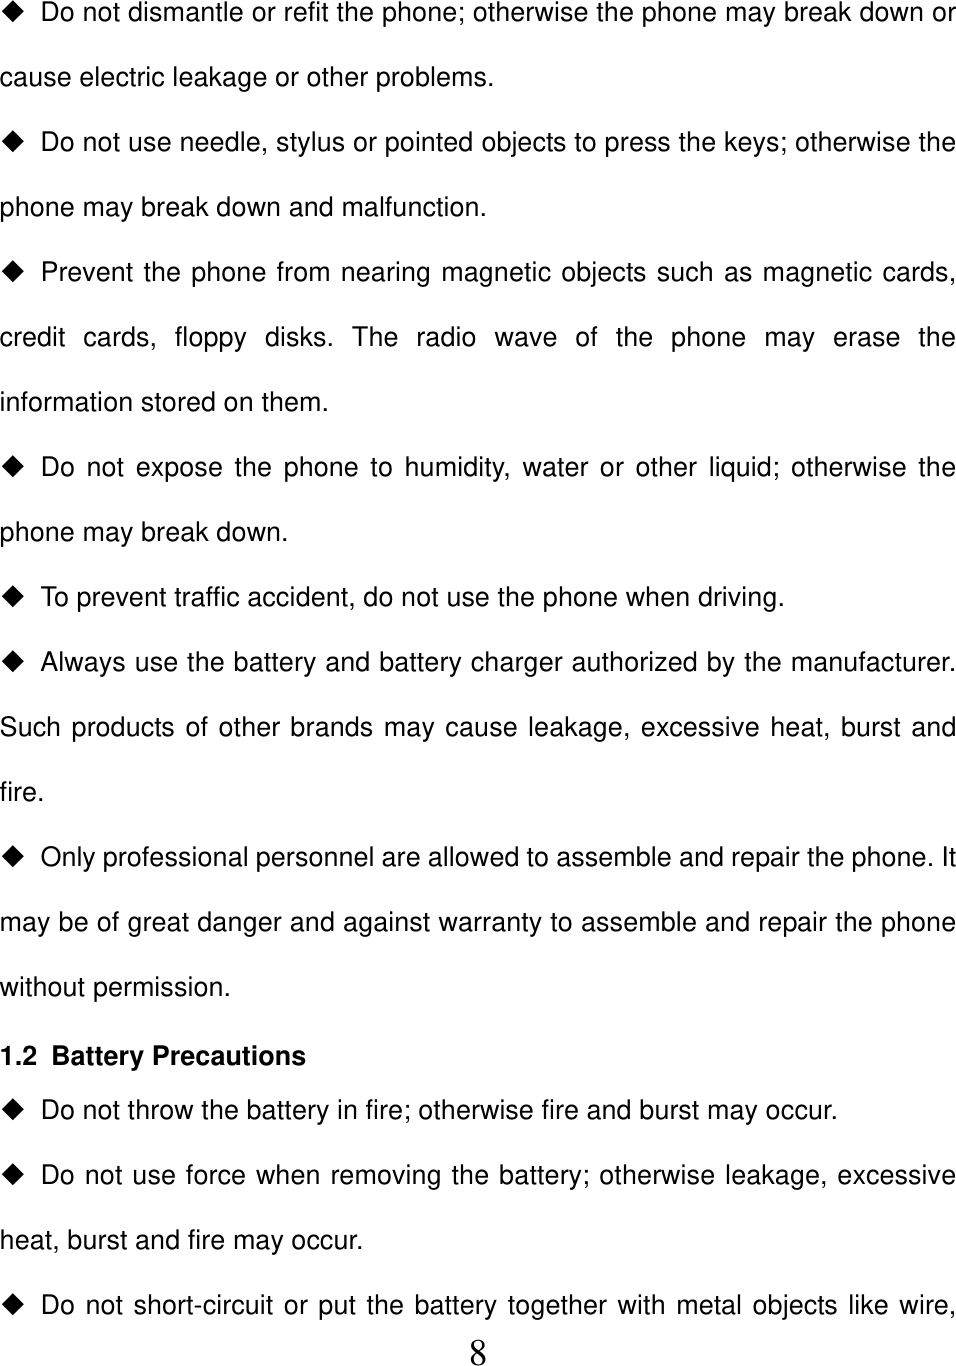  8  Do not dismantle or refit the phone; otherwise the phone may break down or cause electric leakage or other problems.   Do not use needle, stylus or pointed objects to press the keys; otherwise the phone may break down and malfunction.   Prevent the phone from nearing magnetic objects such as magnetic cards, credit cards, floppy disks. The radio wave of the phone may erase the information stored on them.  Do not expose the phone to humidity, water or other liquid; otherwise the phone may break down.   To prevent traffic accident, do not use the phone when driving.   Always use the battery and battery charger authorized by the manufacturer. Such products of other brands may cause leakage, excessive heat, burst and fire.   Only professional personnel are allowed to assemble and repair the phone. It may be of great danger and against warranty to assemble and repair the phone without permission.   1.2 Battery Precautions   Do not throw the battery in fire; otherwise fire and burst may occur.     Do not use force when removing the battery; otherwise leakage, excessive heat, burst and fire may occur.   Do not short-circuit or put the battery together with metal objects like wire, 